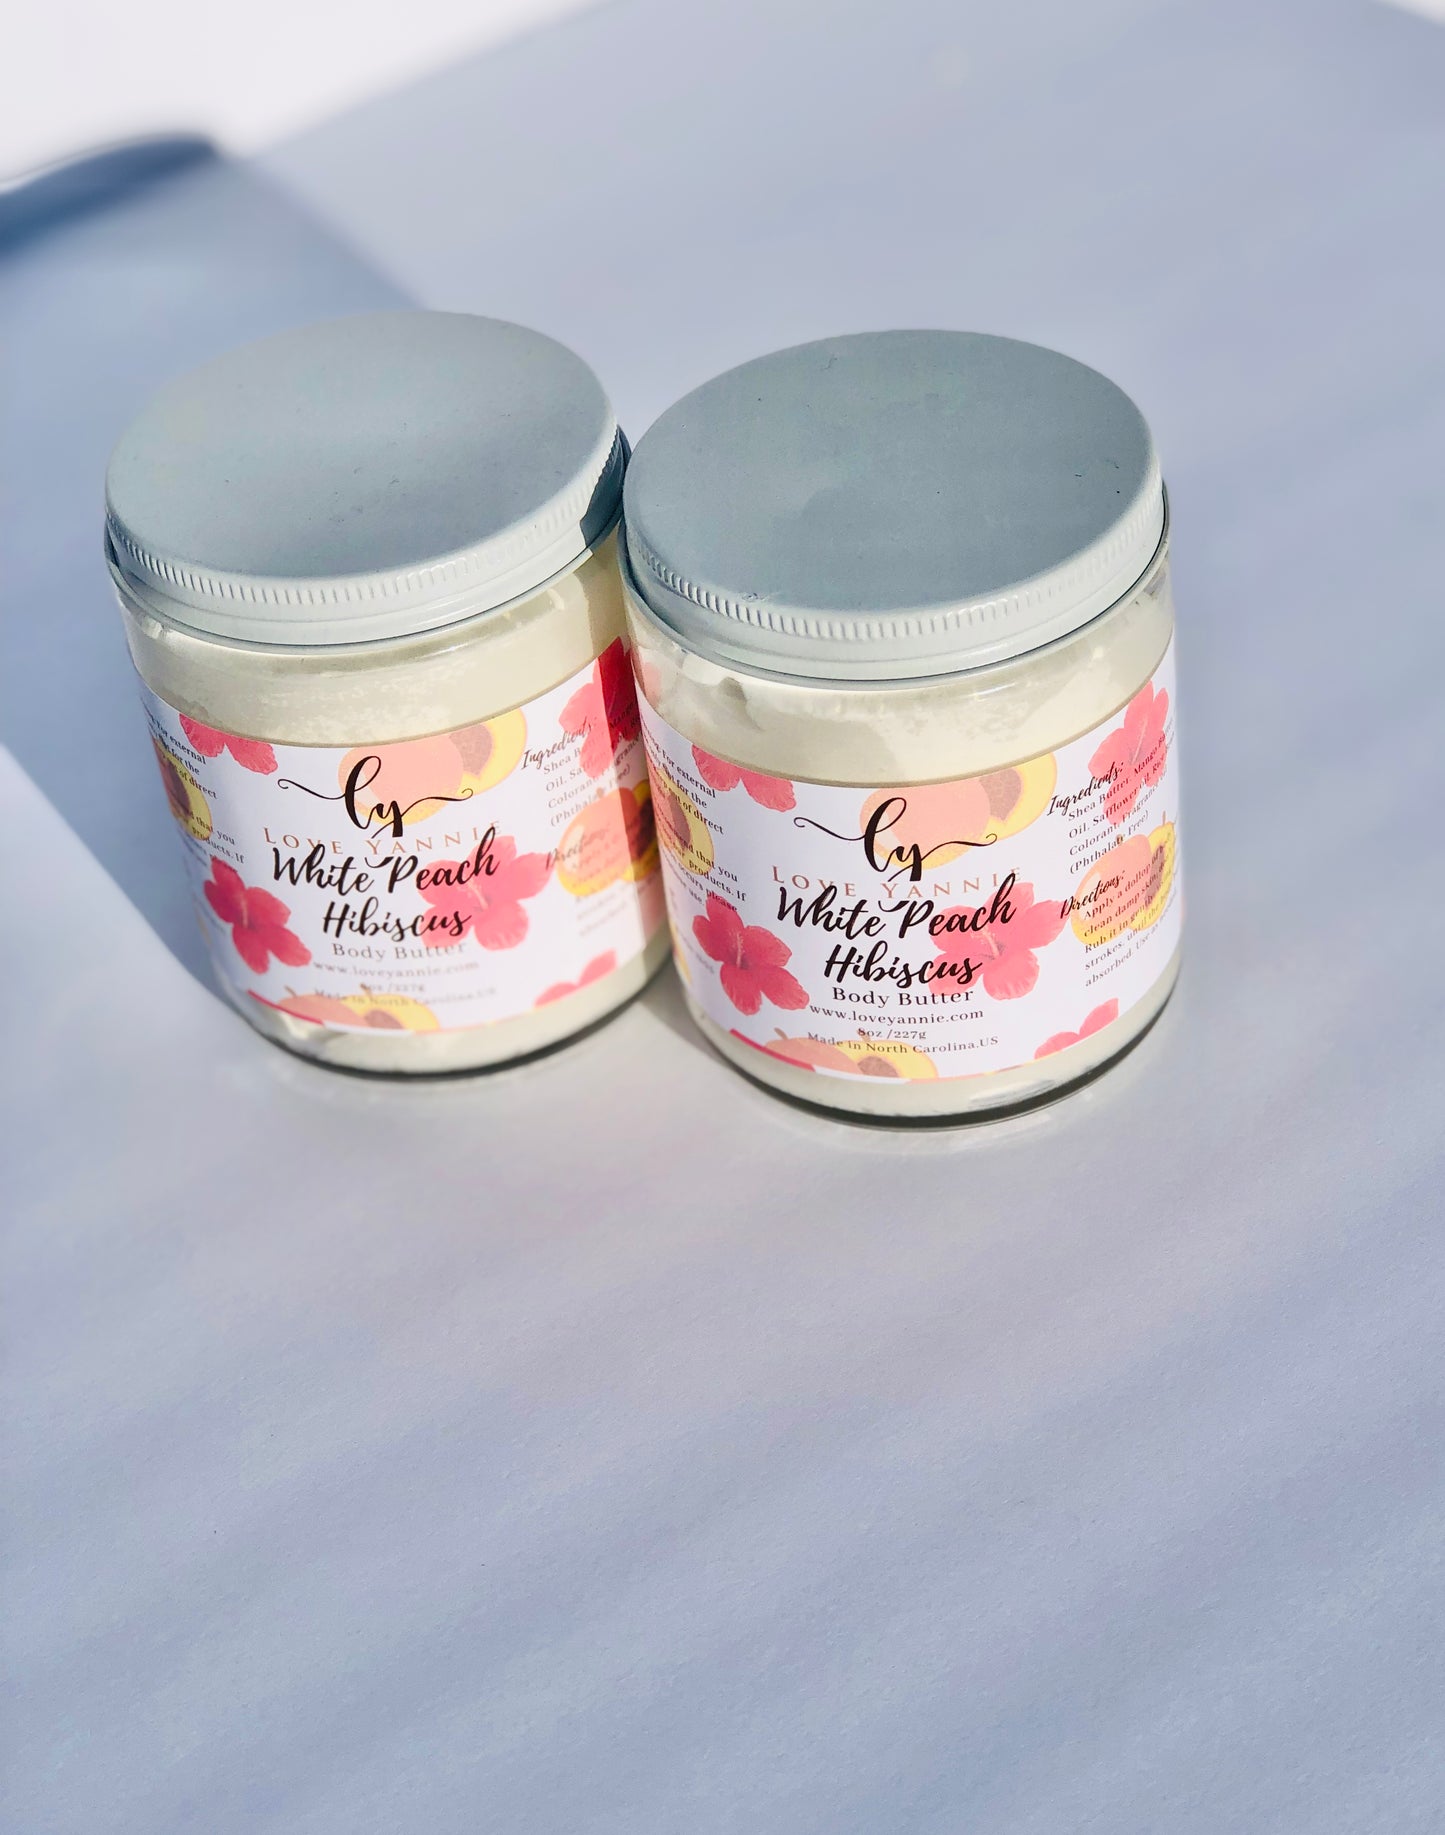 White Peach and Hibiscus Body Butter